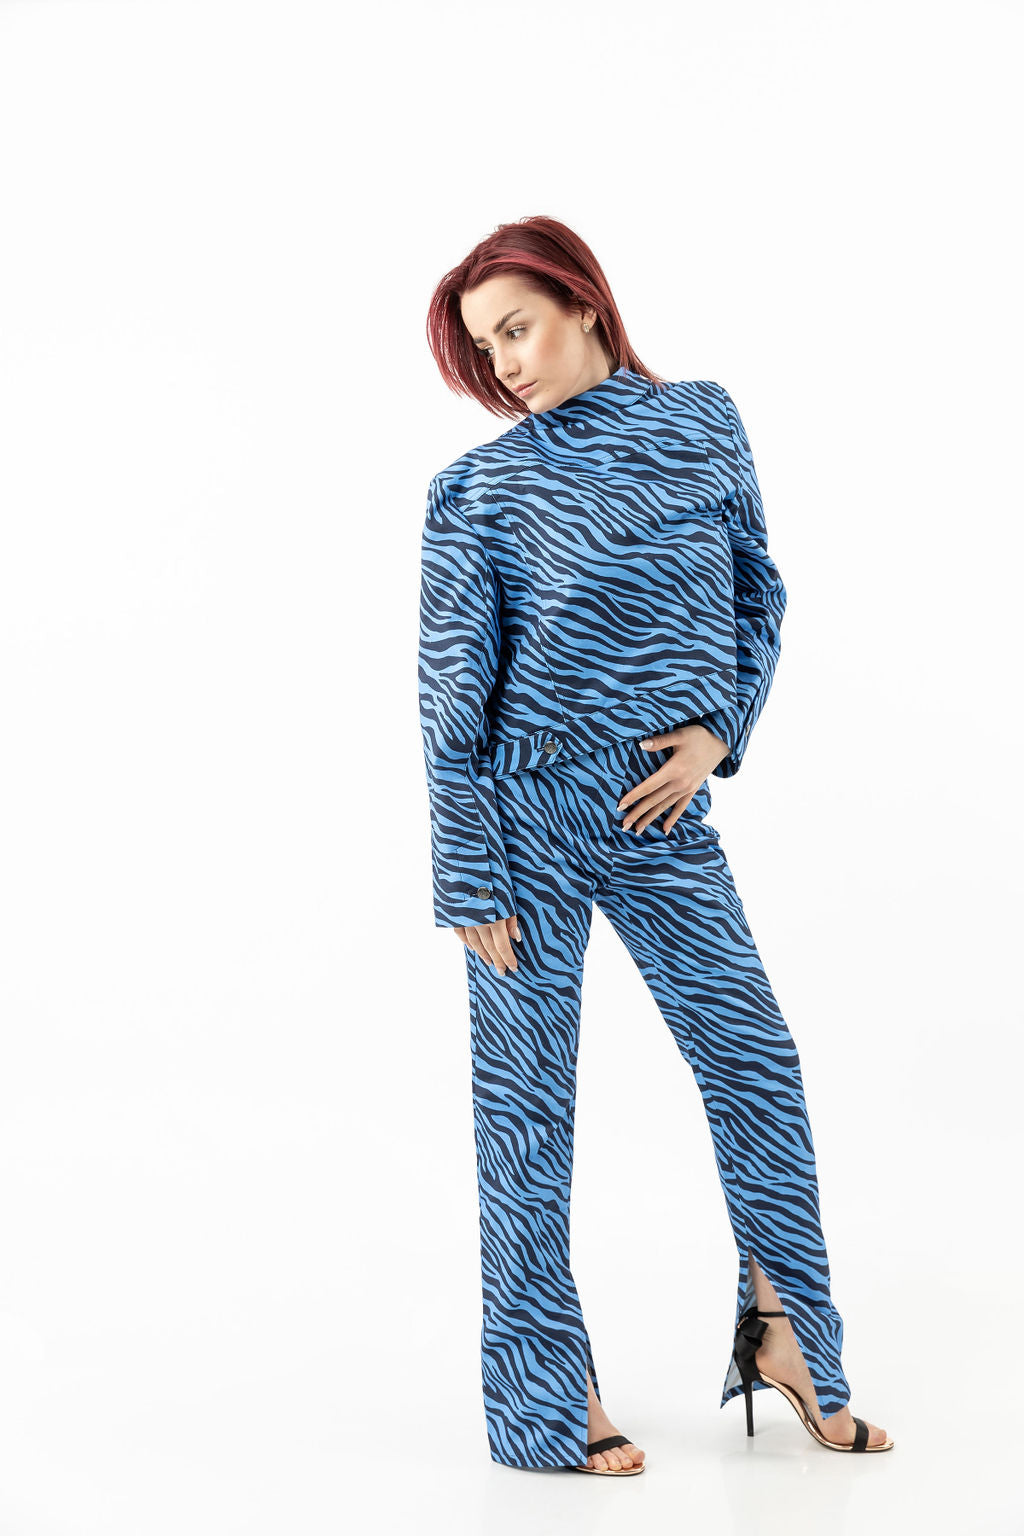 Pants in a blue zebra print with leg openings